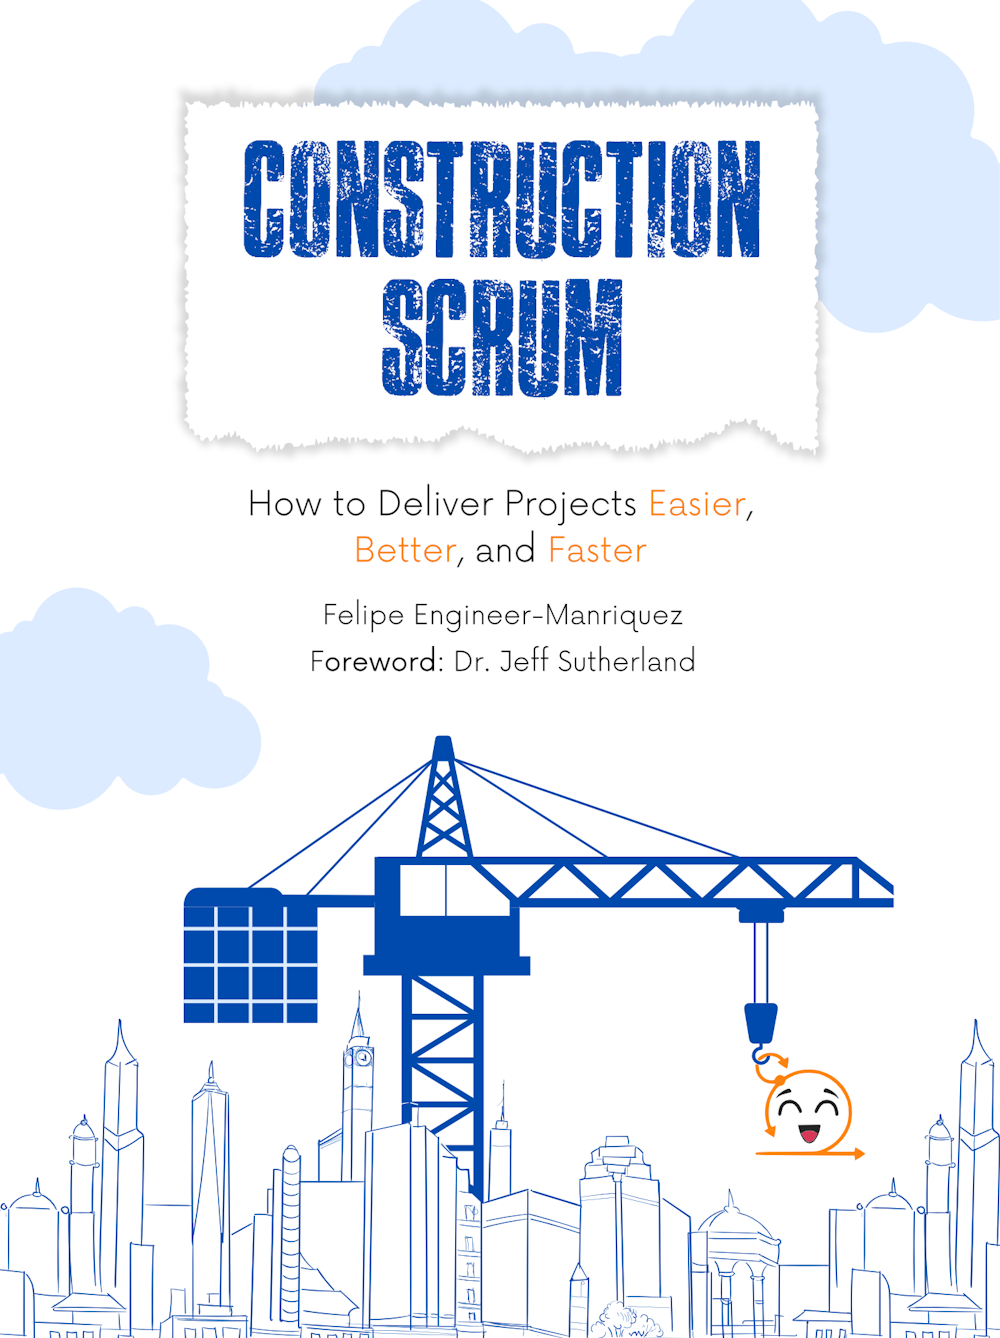 Applying Scrum in Construction Projects: Insights from 